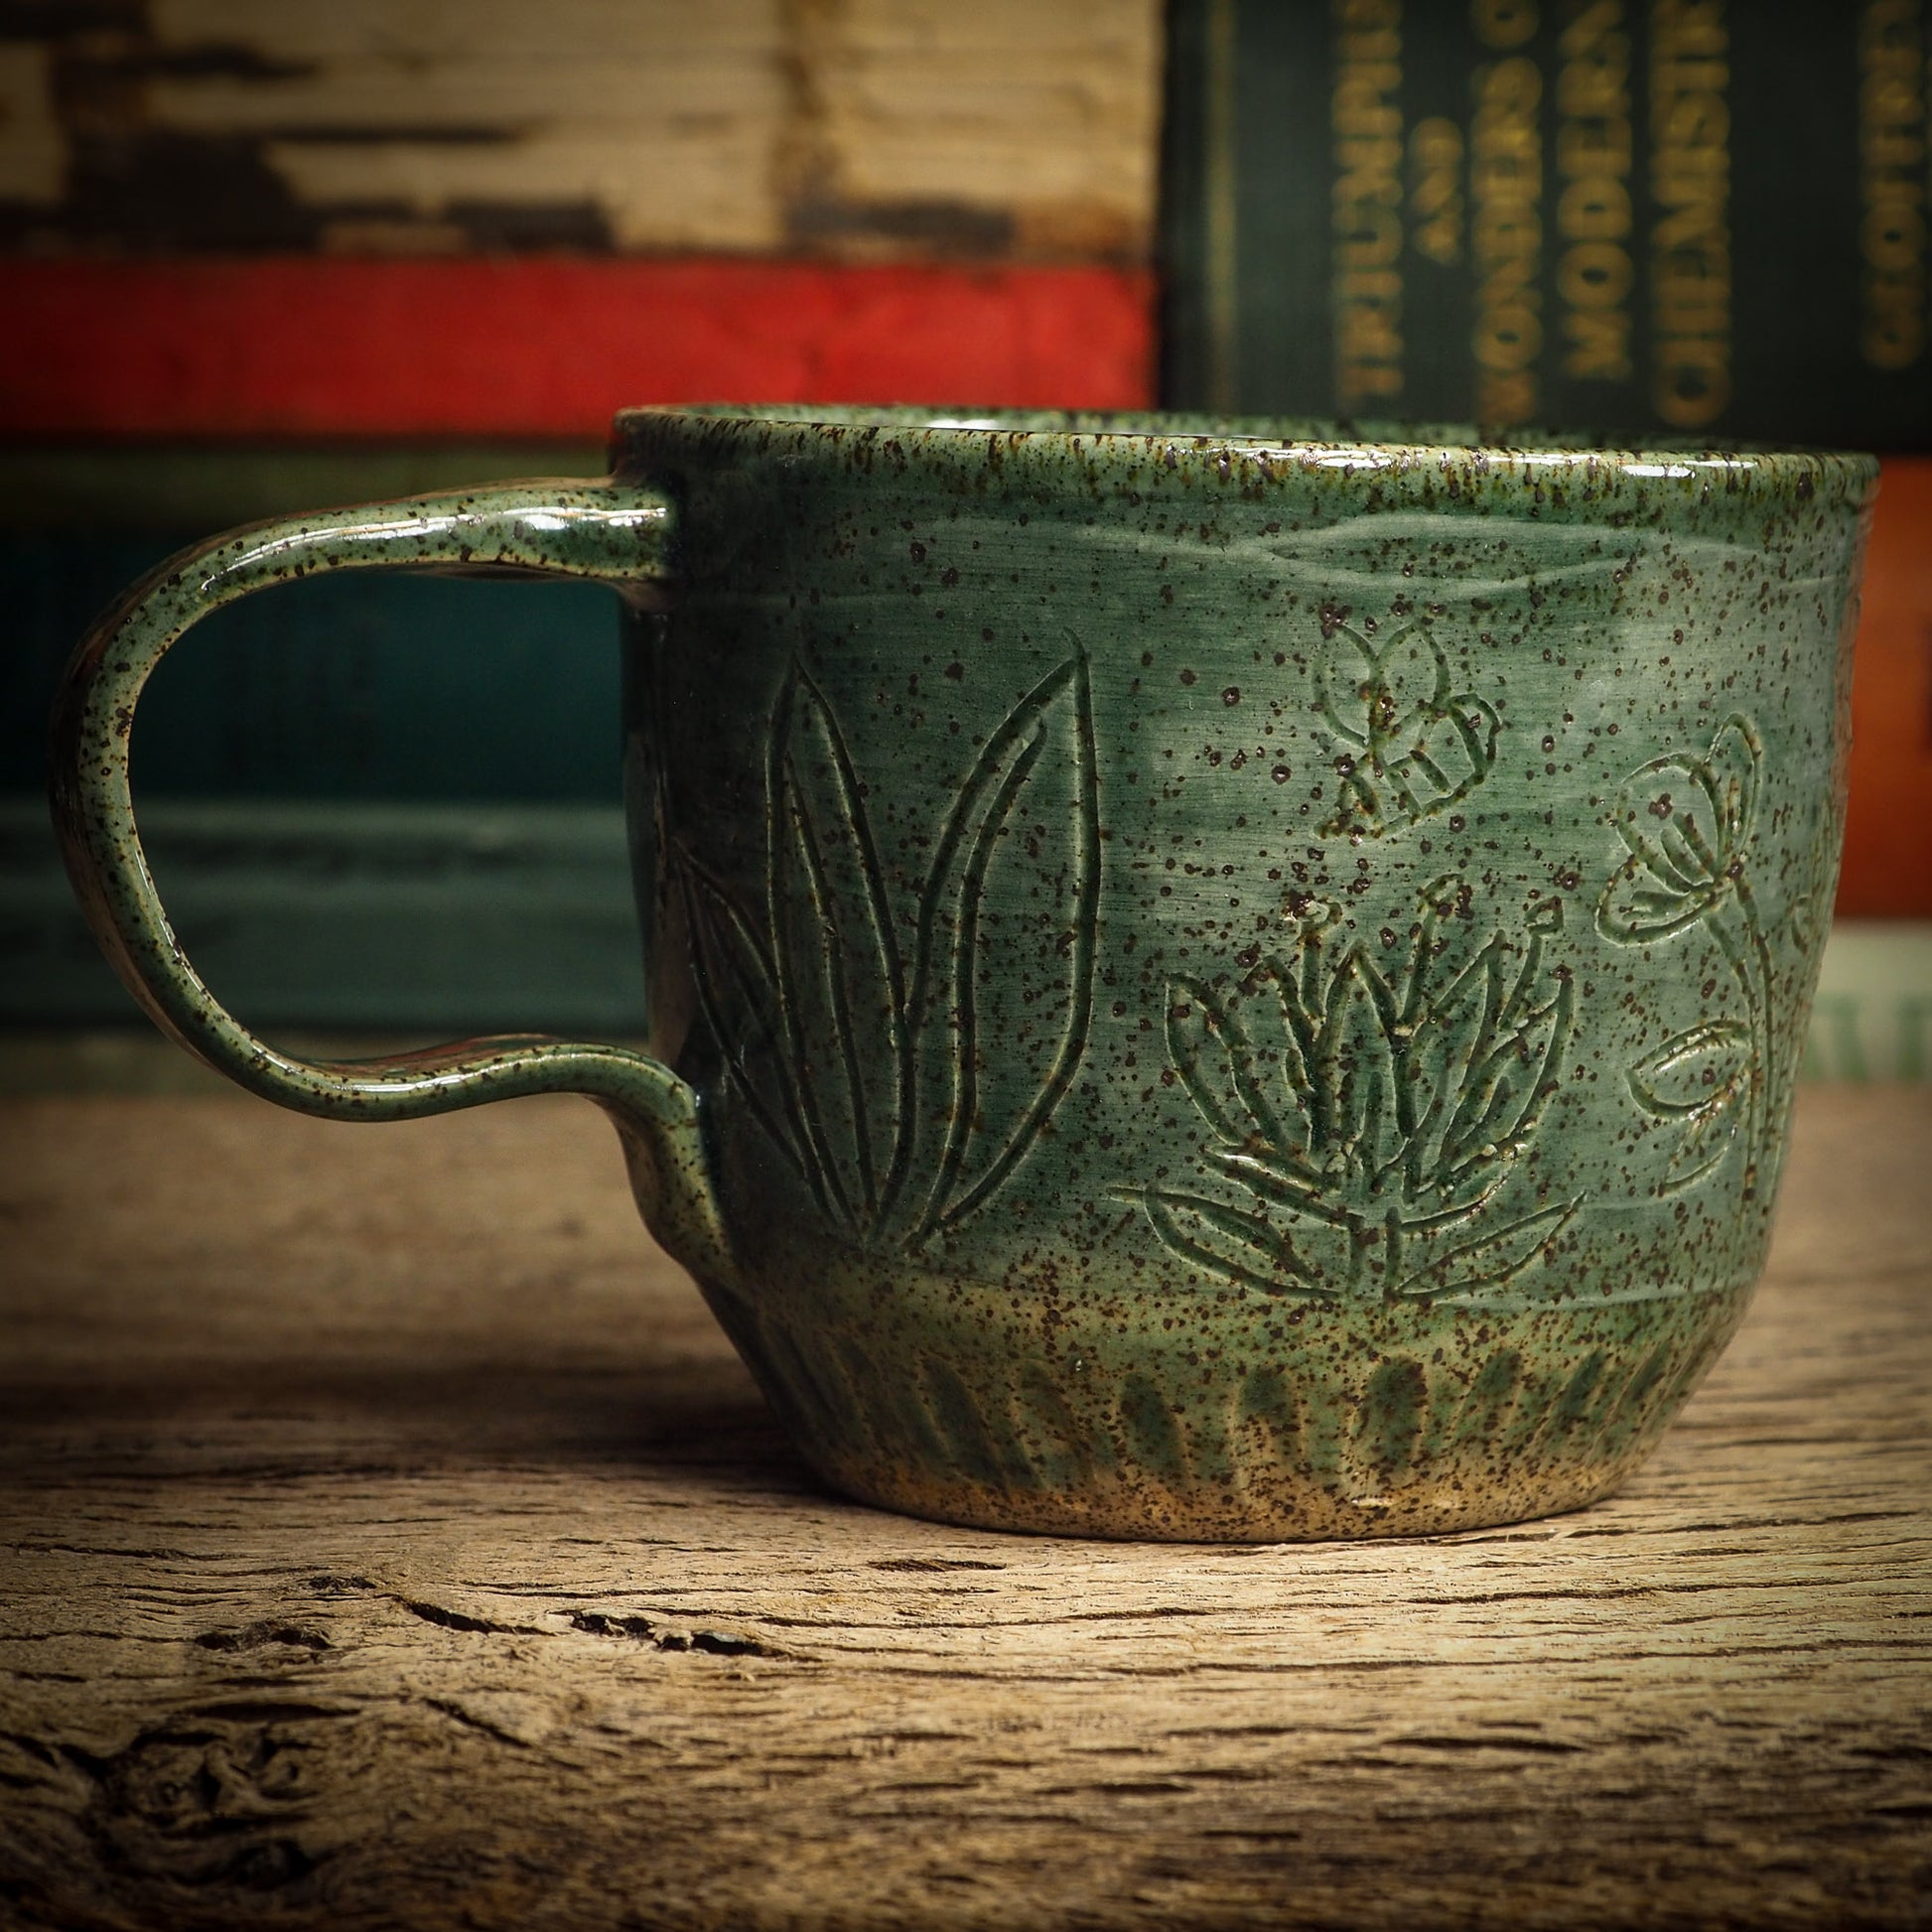 An original glazed ceramic mug by Idania Salcido, the artist behind Danita Art. It measures 3 x 3 x 3 Inches, with deep green hue glazes and hand decorated figures on the sides. Totally handmade in my studio, this is a unique piece that cannot be repeated. Food and drink safe, hand wash only.